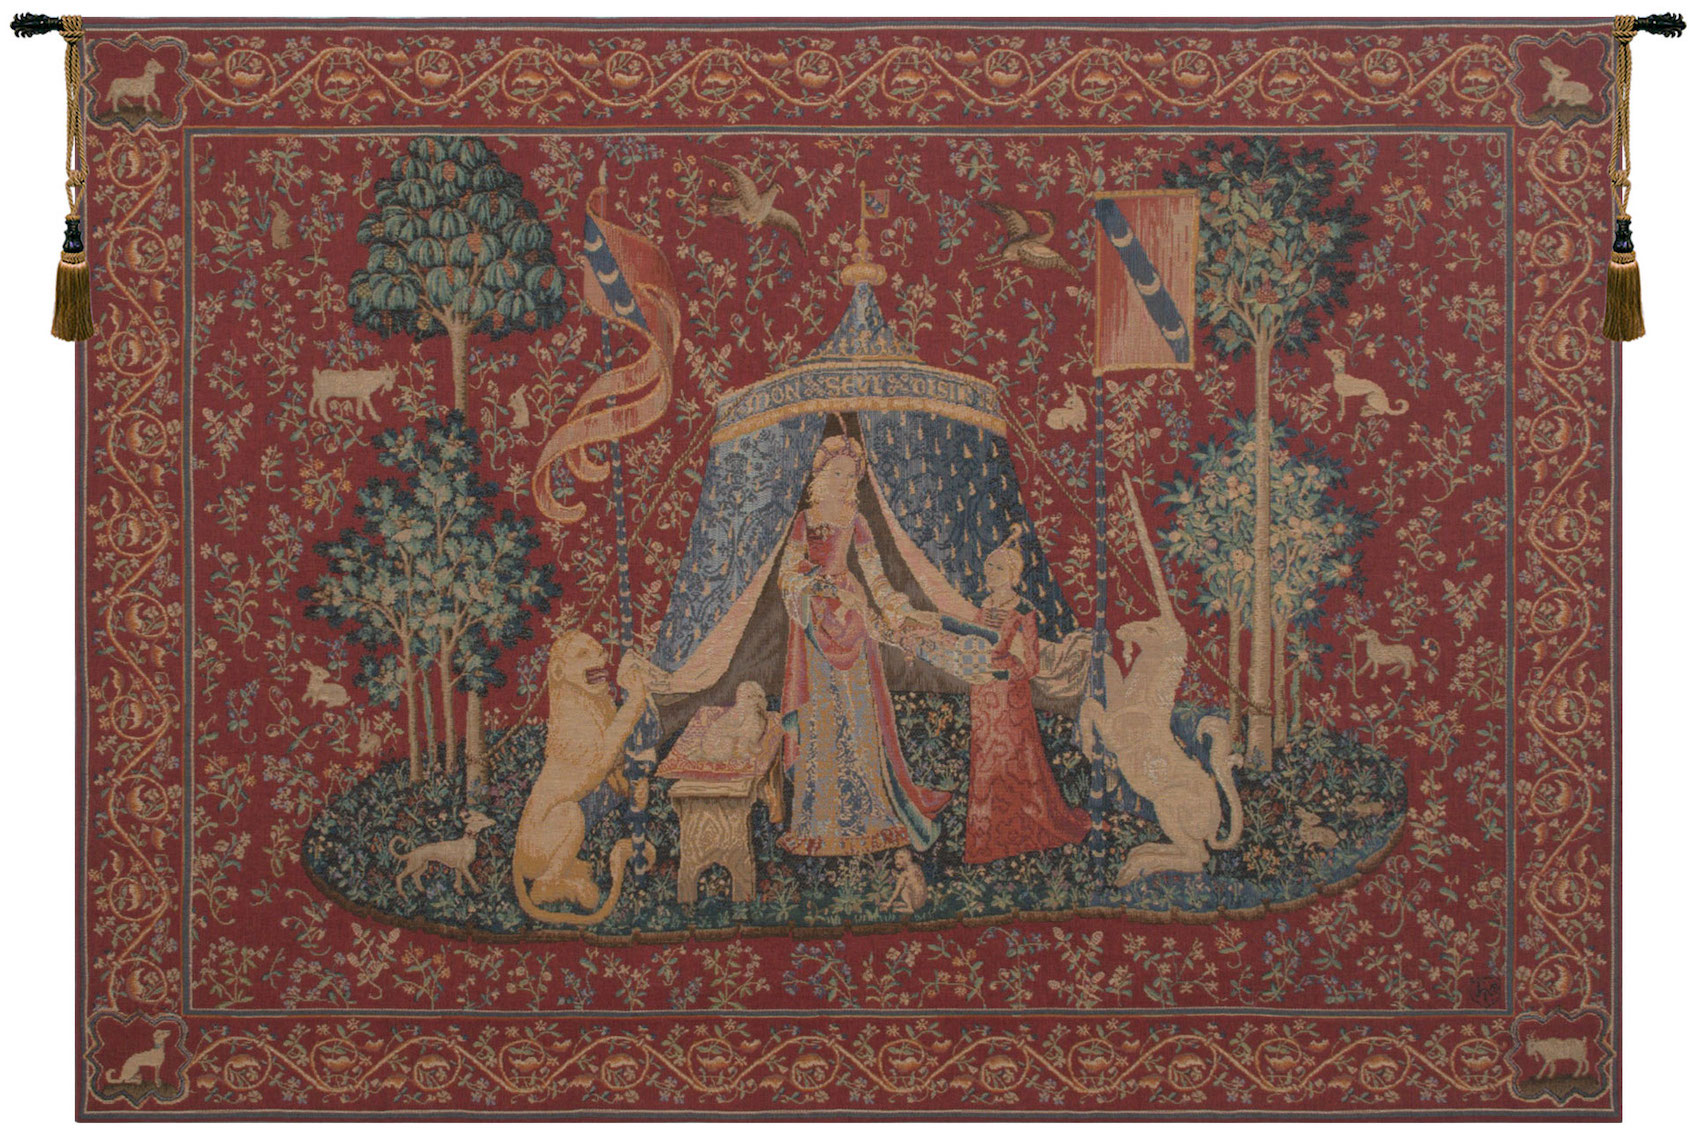 Lady and the Unicorn A Mon Seul Desir I French Wall Tapestry Hanging, Tapestries, Woven, wool, lady, unicorn, tapestries, tapestrys, hangings, and, the, wool, Renaissance, rennaisance, rennaissance, renaisance, renassance, renaissanse